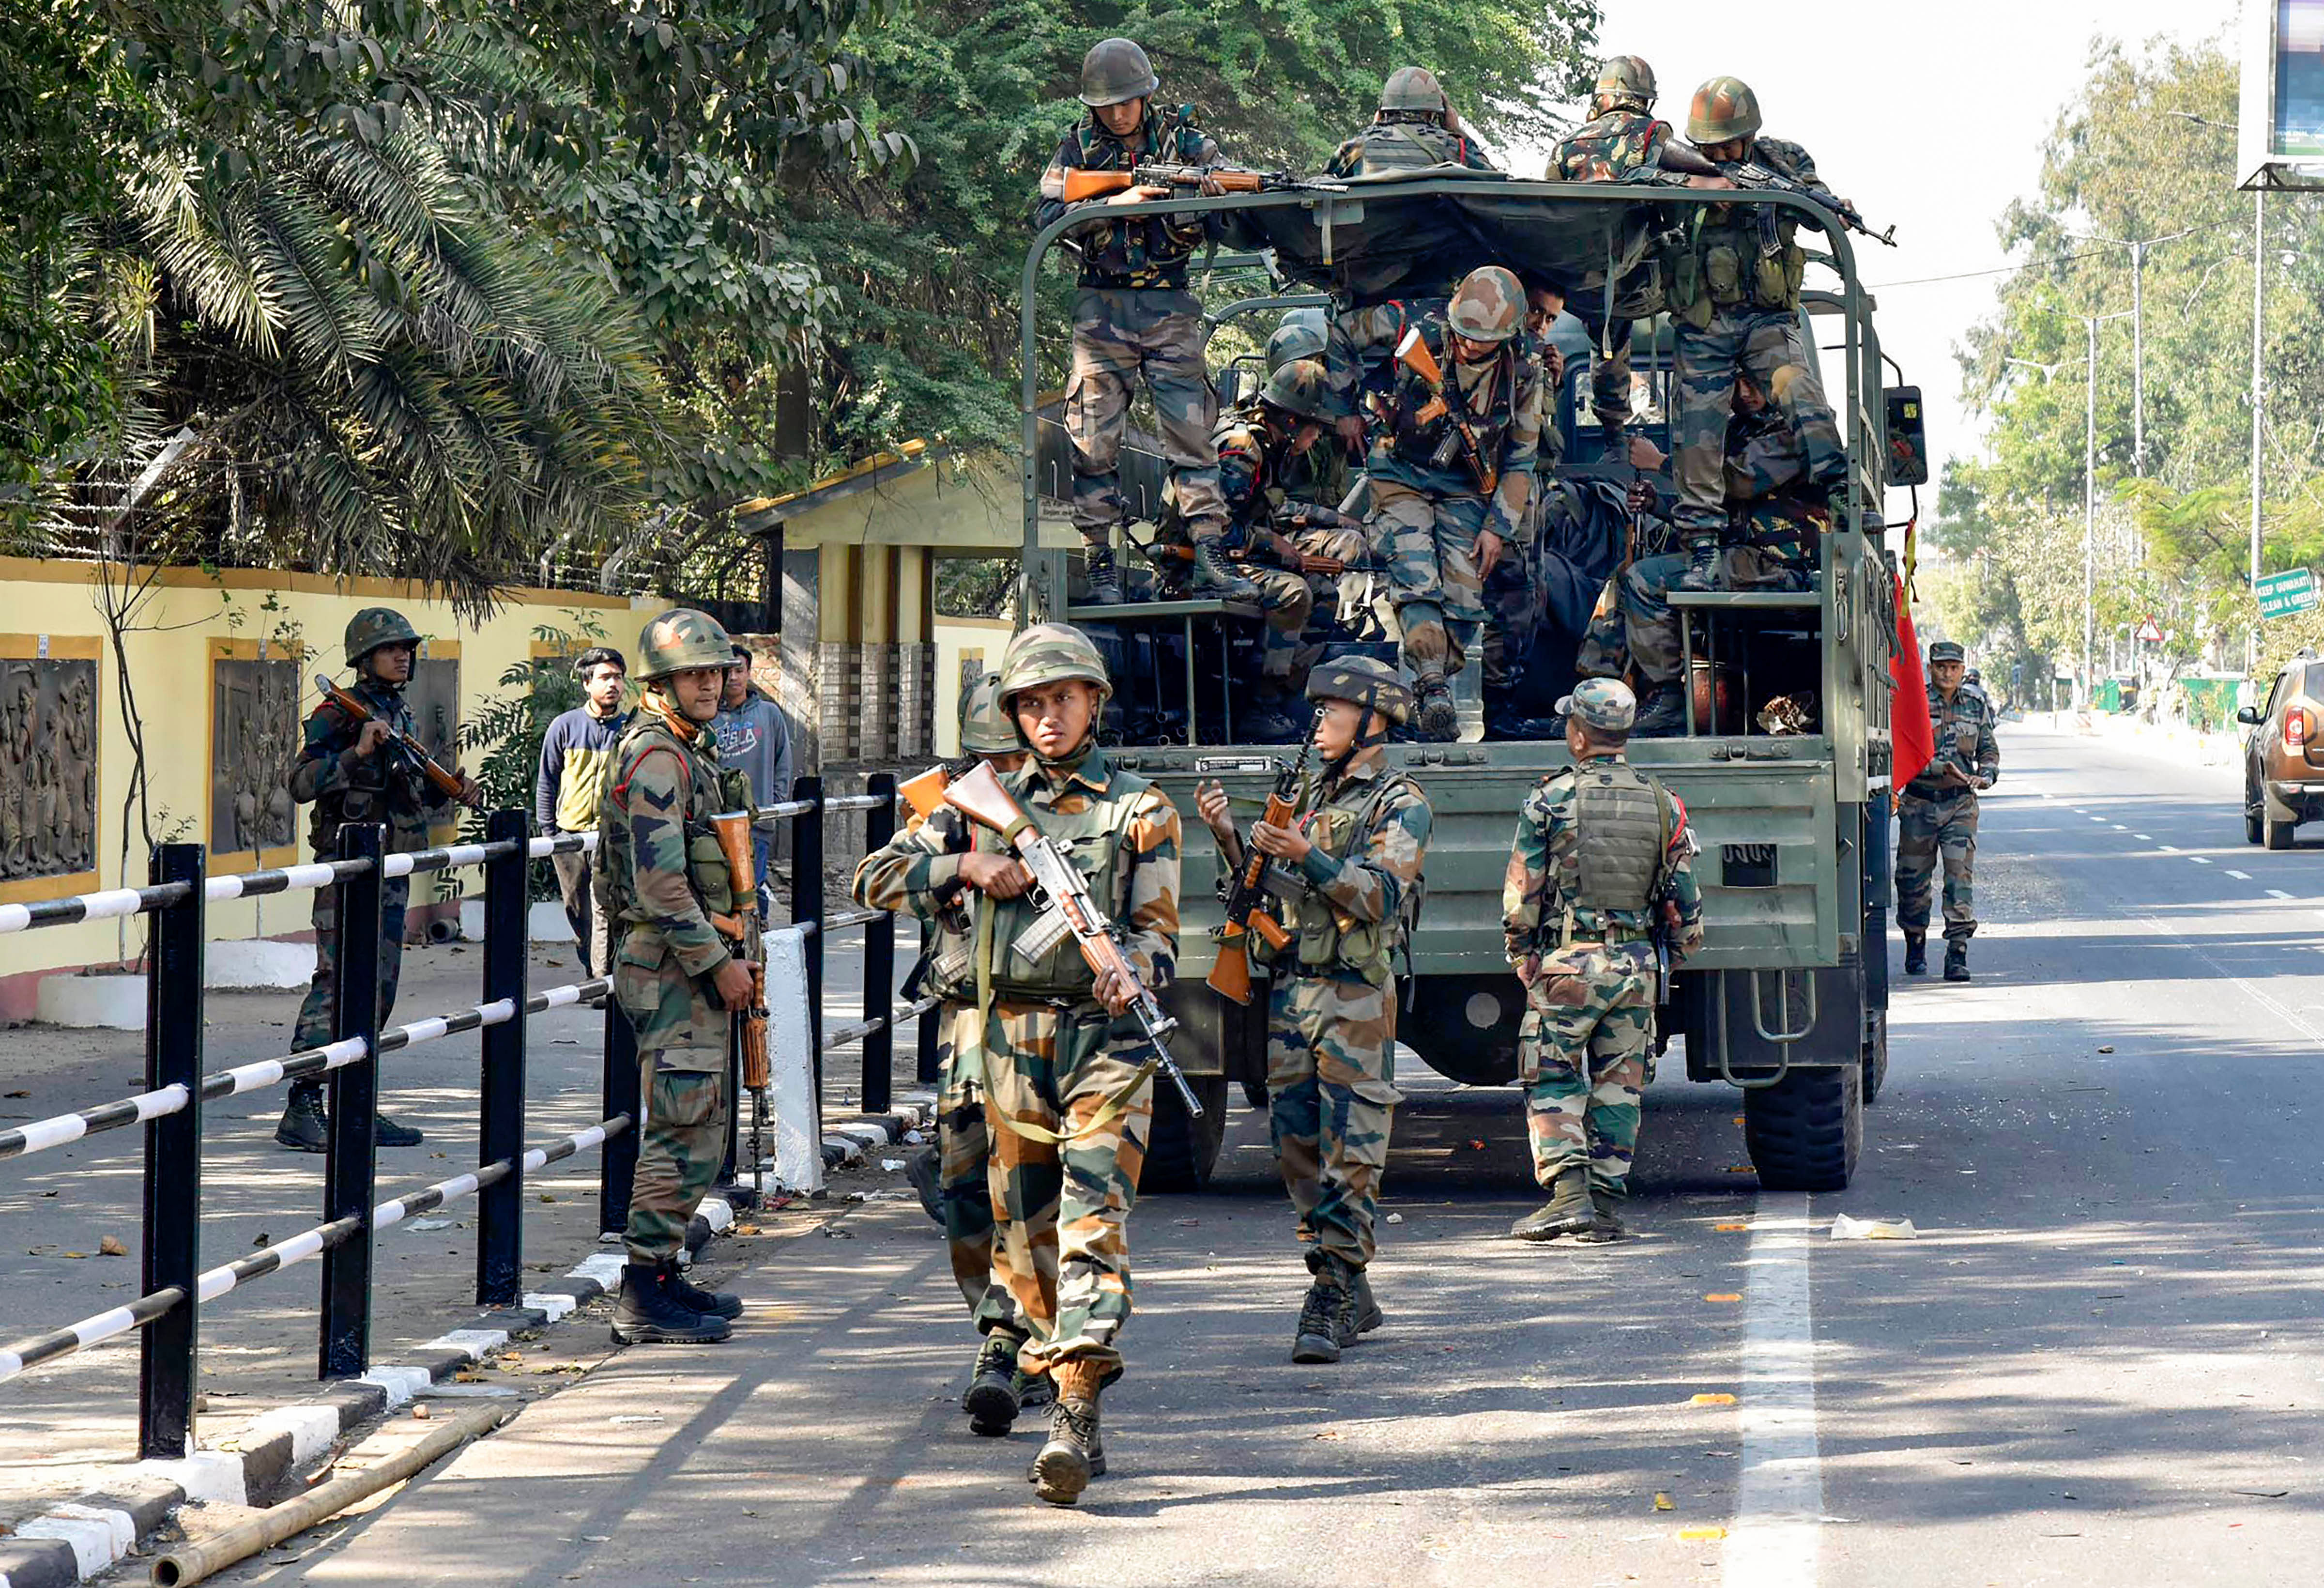 Army personnel get down from their vehicle to patrol the streets amid protests across the state against the passing of Citizenship Amendment Bill, in Guwahati. (PTI Photo)